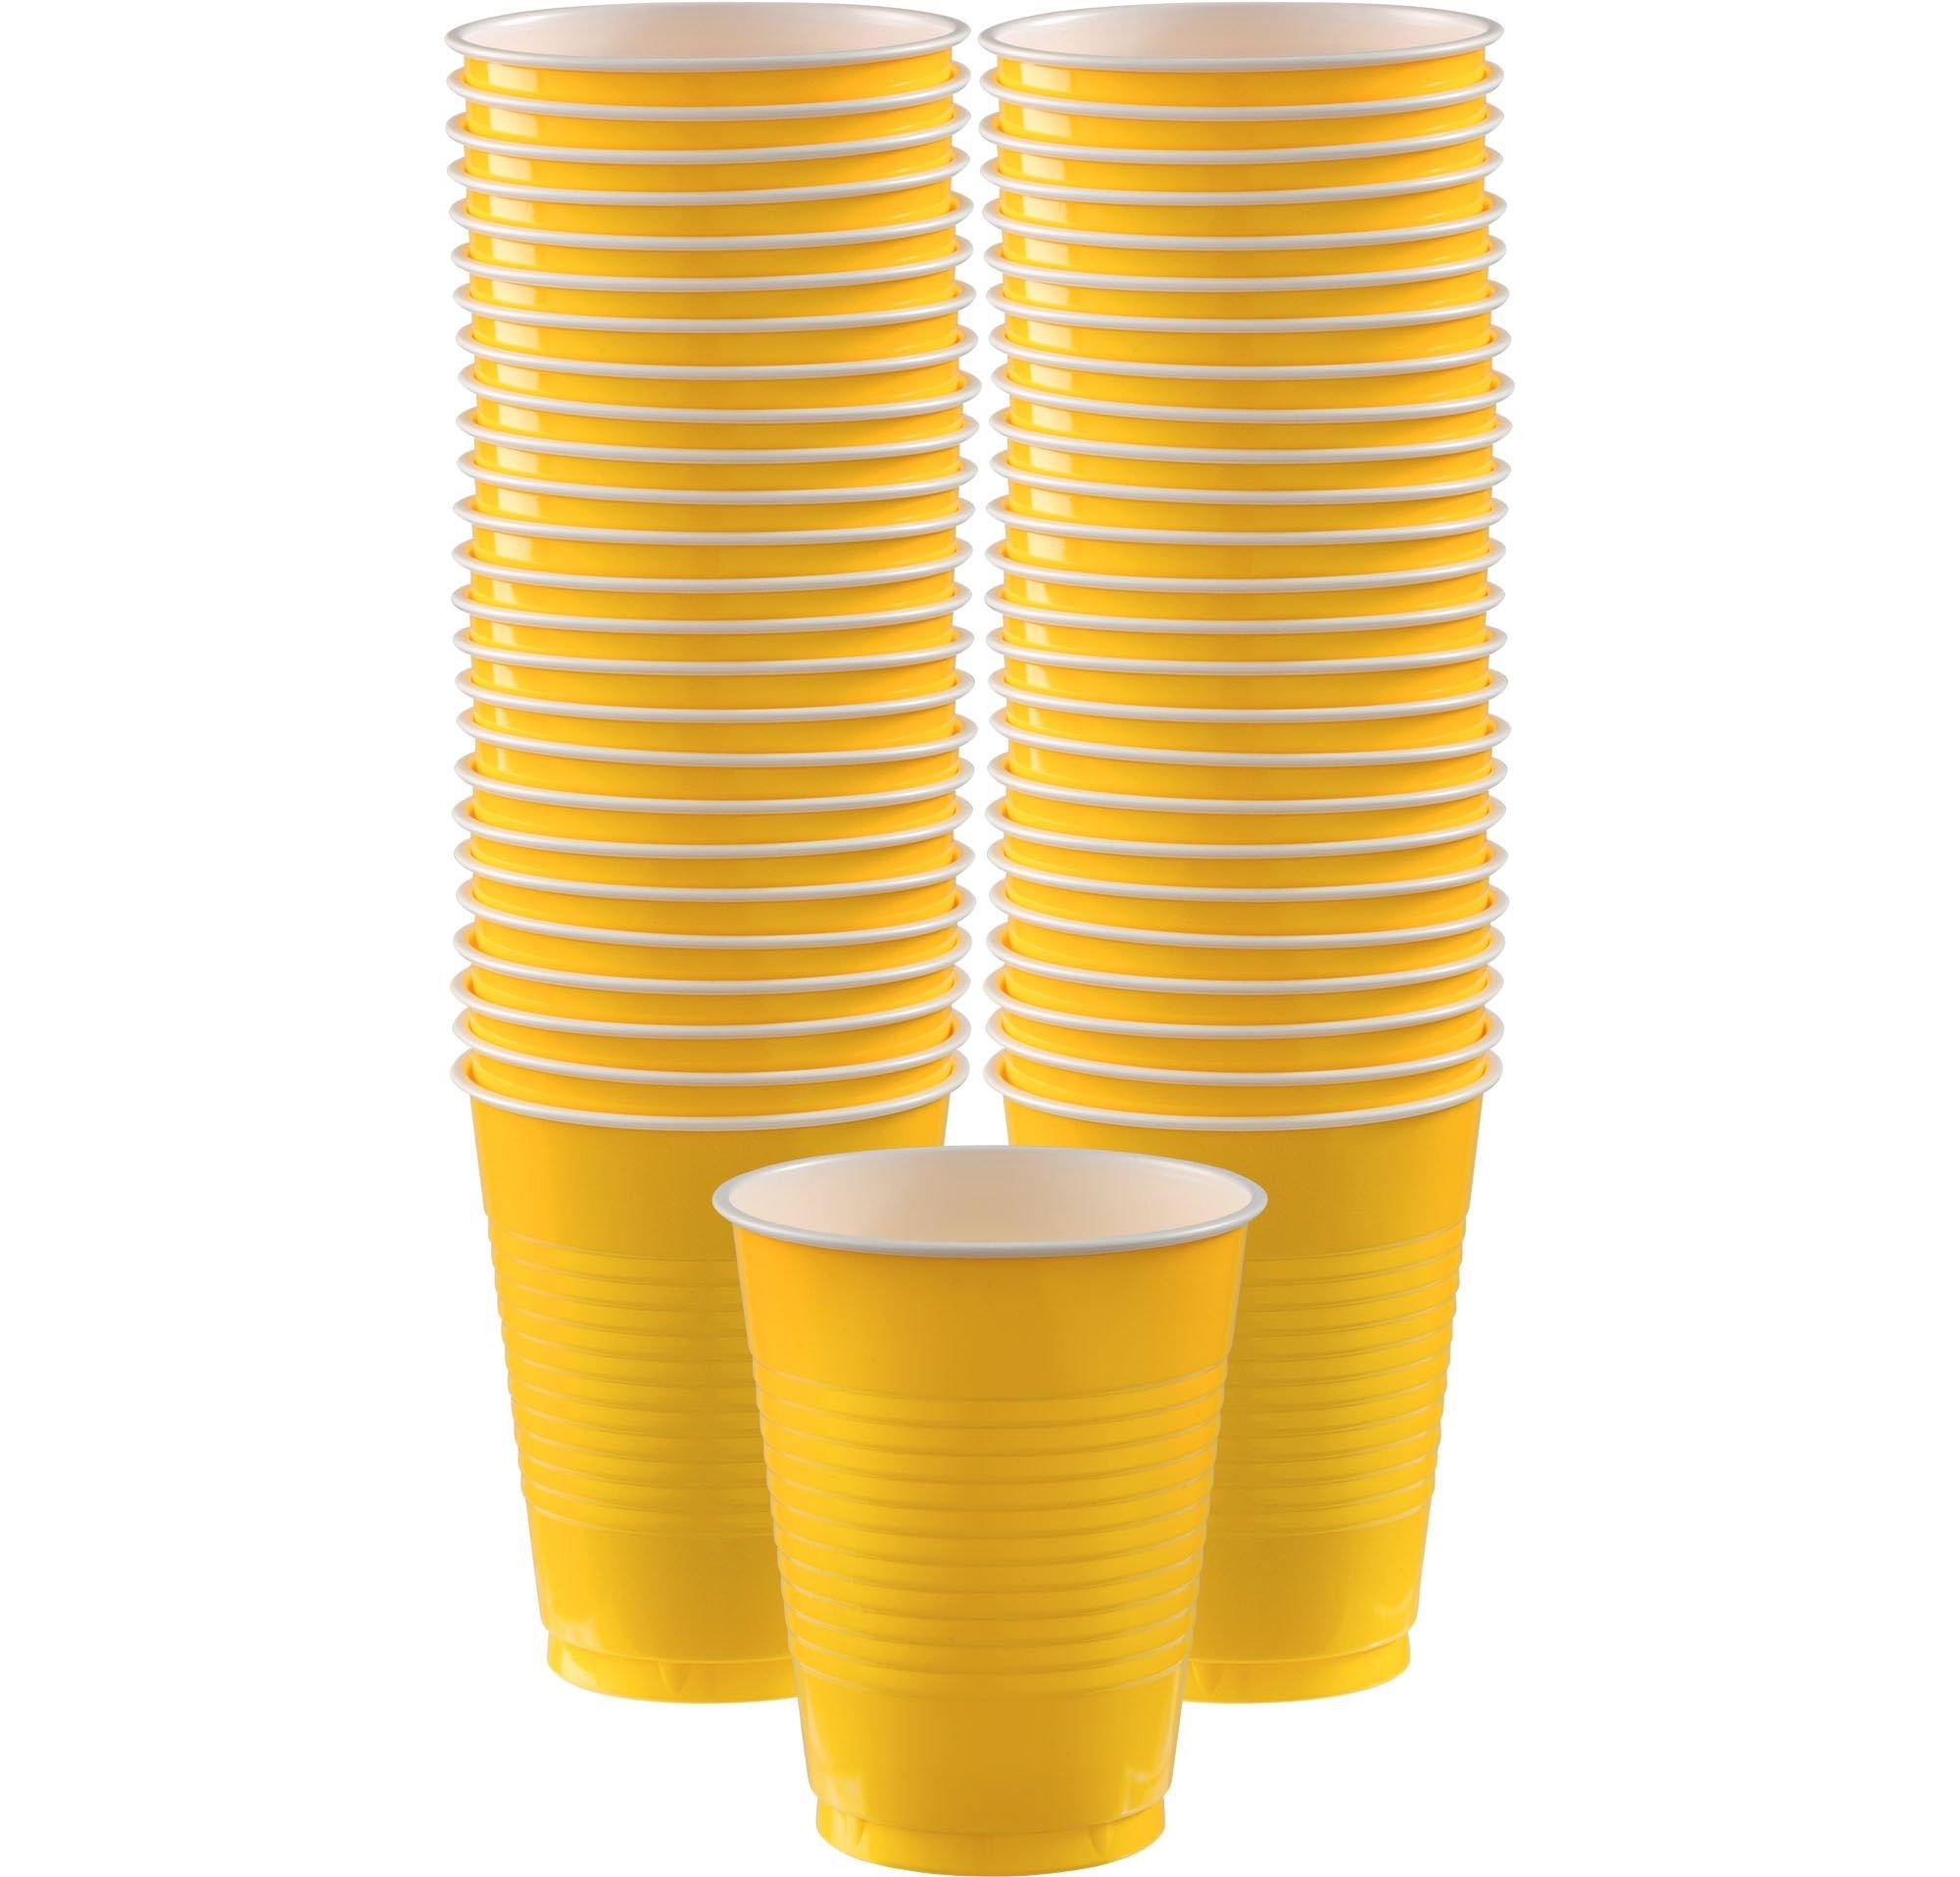 Amscan Everyday Big Party Plastic Cup, Sunshine Yellow - 50 count